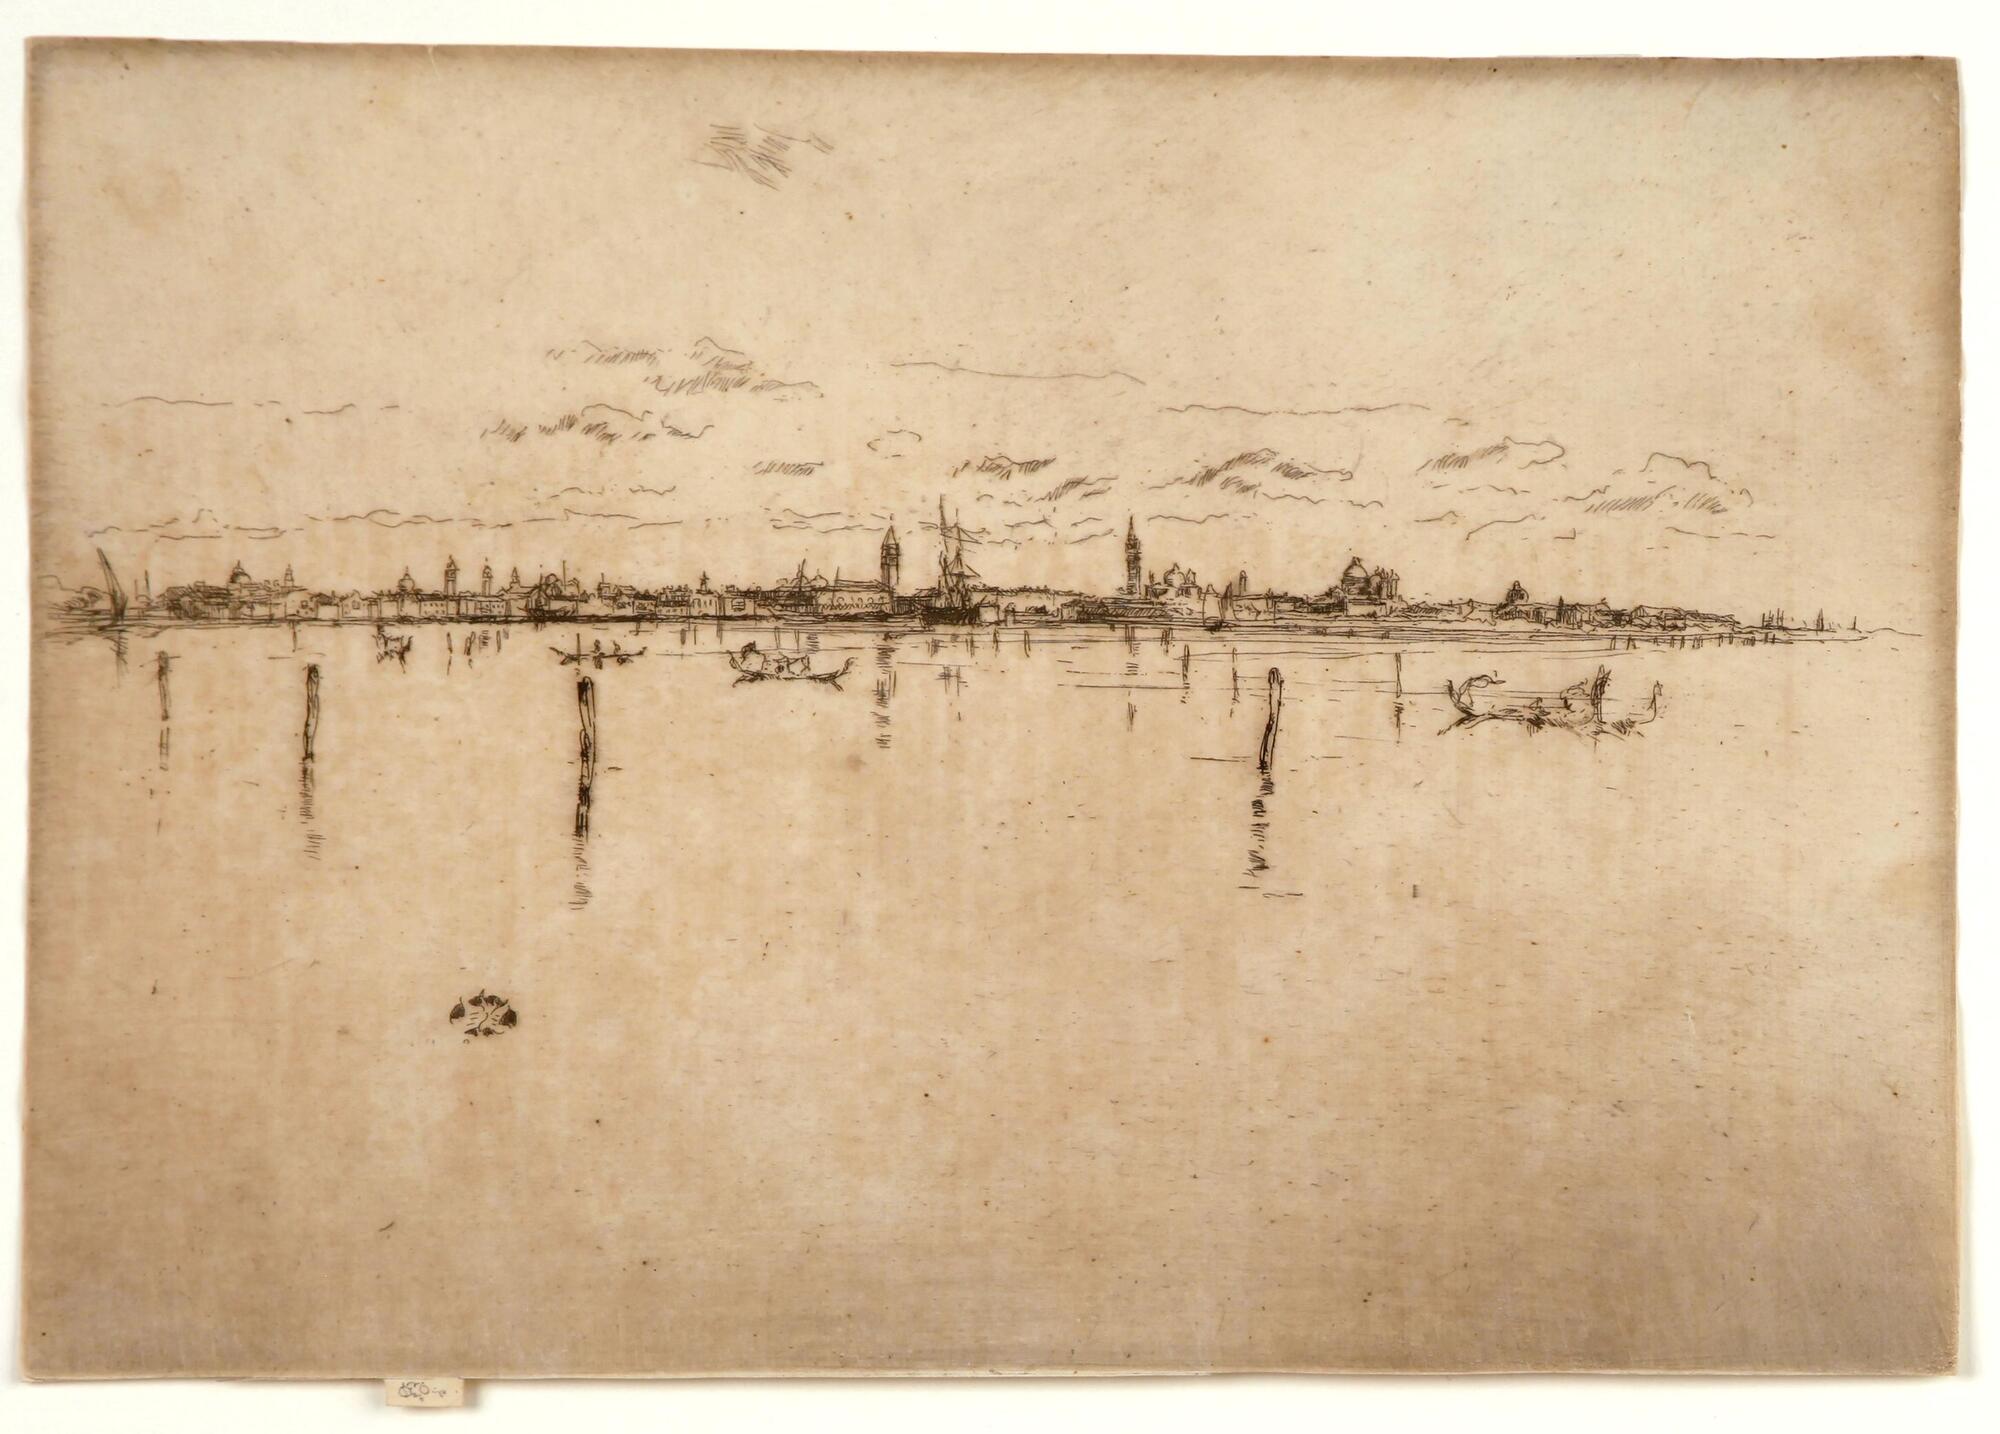 Seen from a distance with an expanse of water in the foreground, a city can be seen along the horizon line wtih towers, domes and sailing ships. Poles marking the channel stike out of the water and gondolas can be seen in the middle ground.